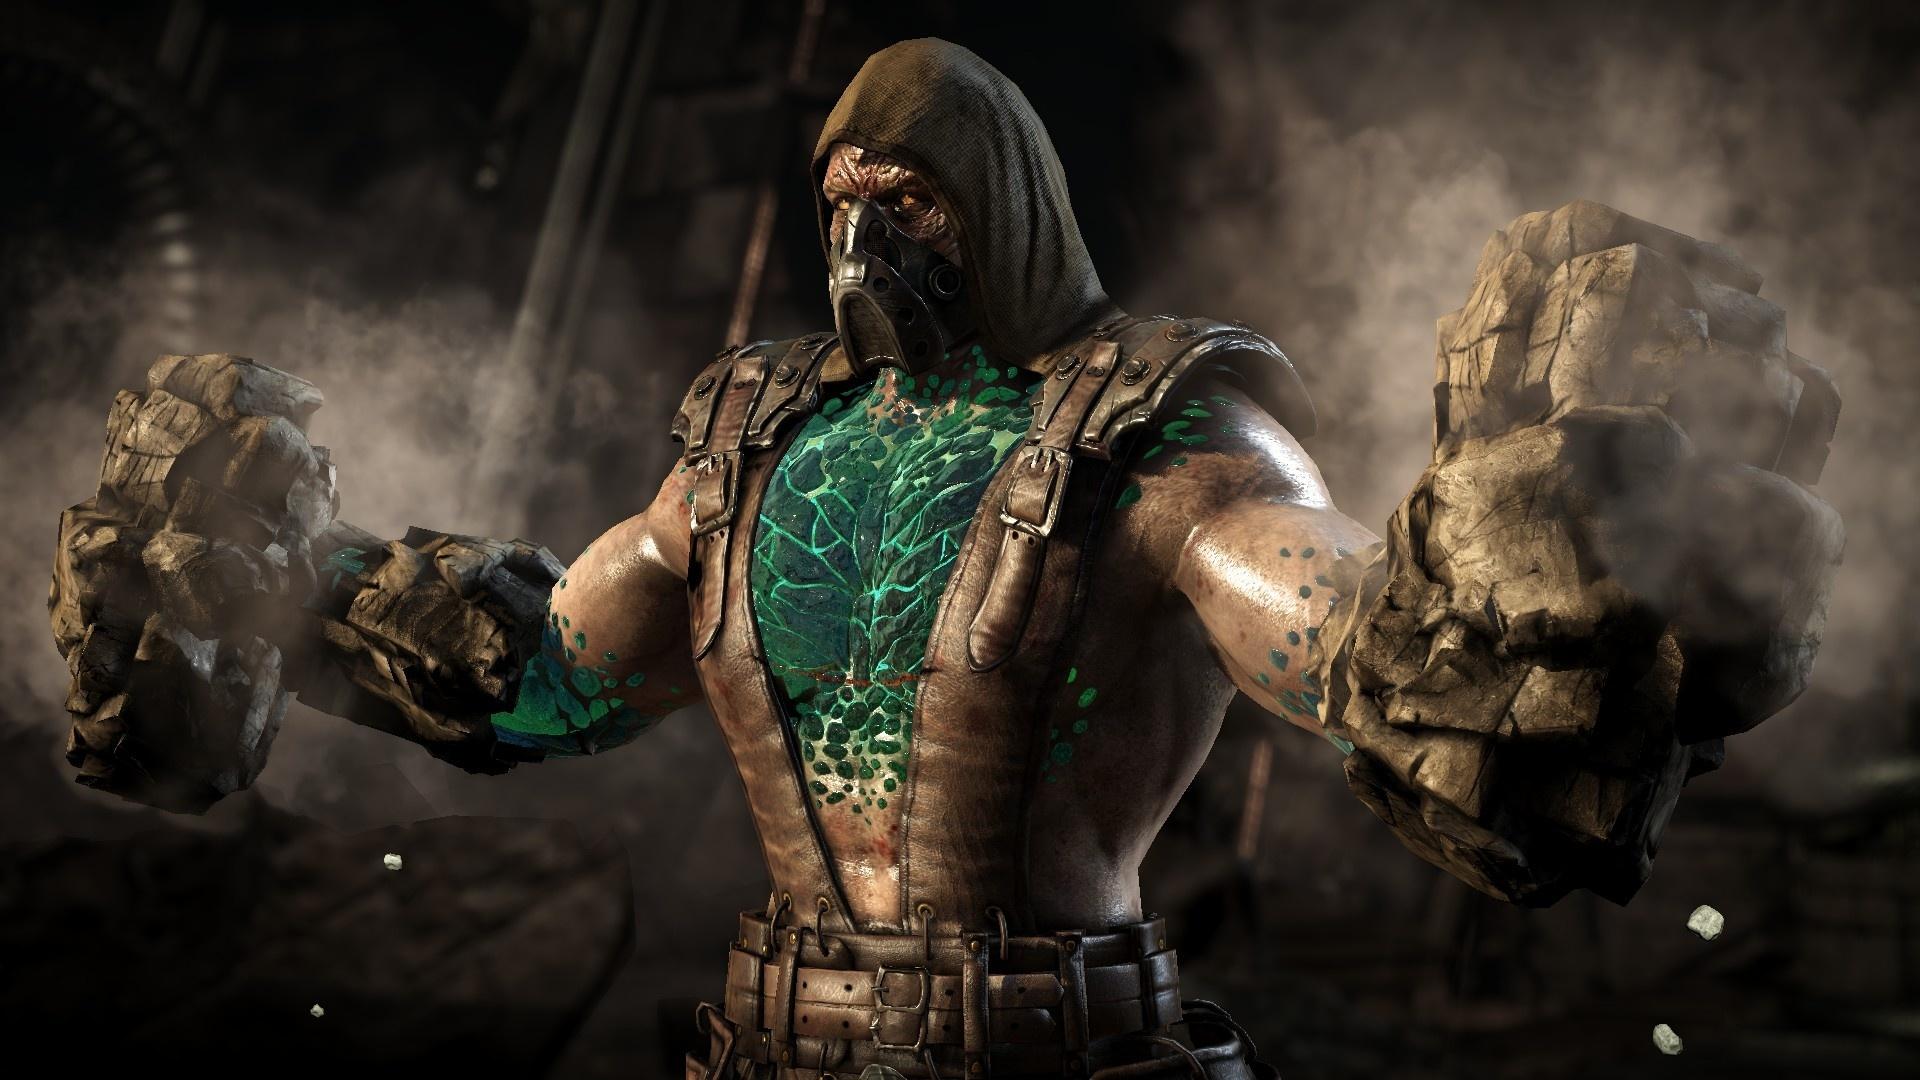 Who wants Tremor to come back in MK11?